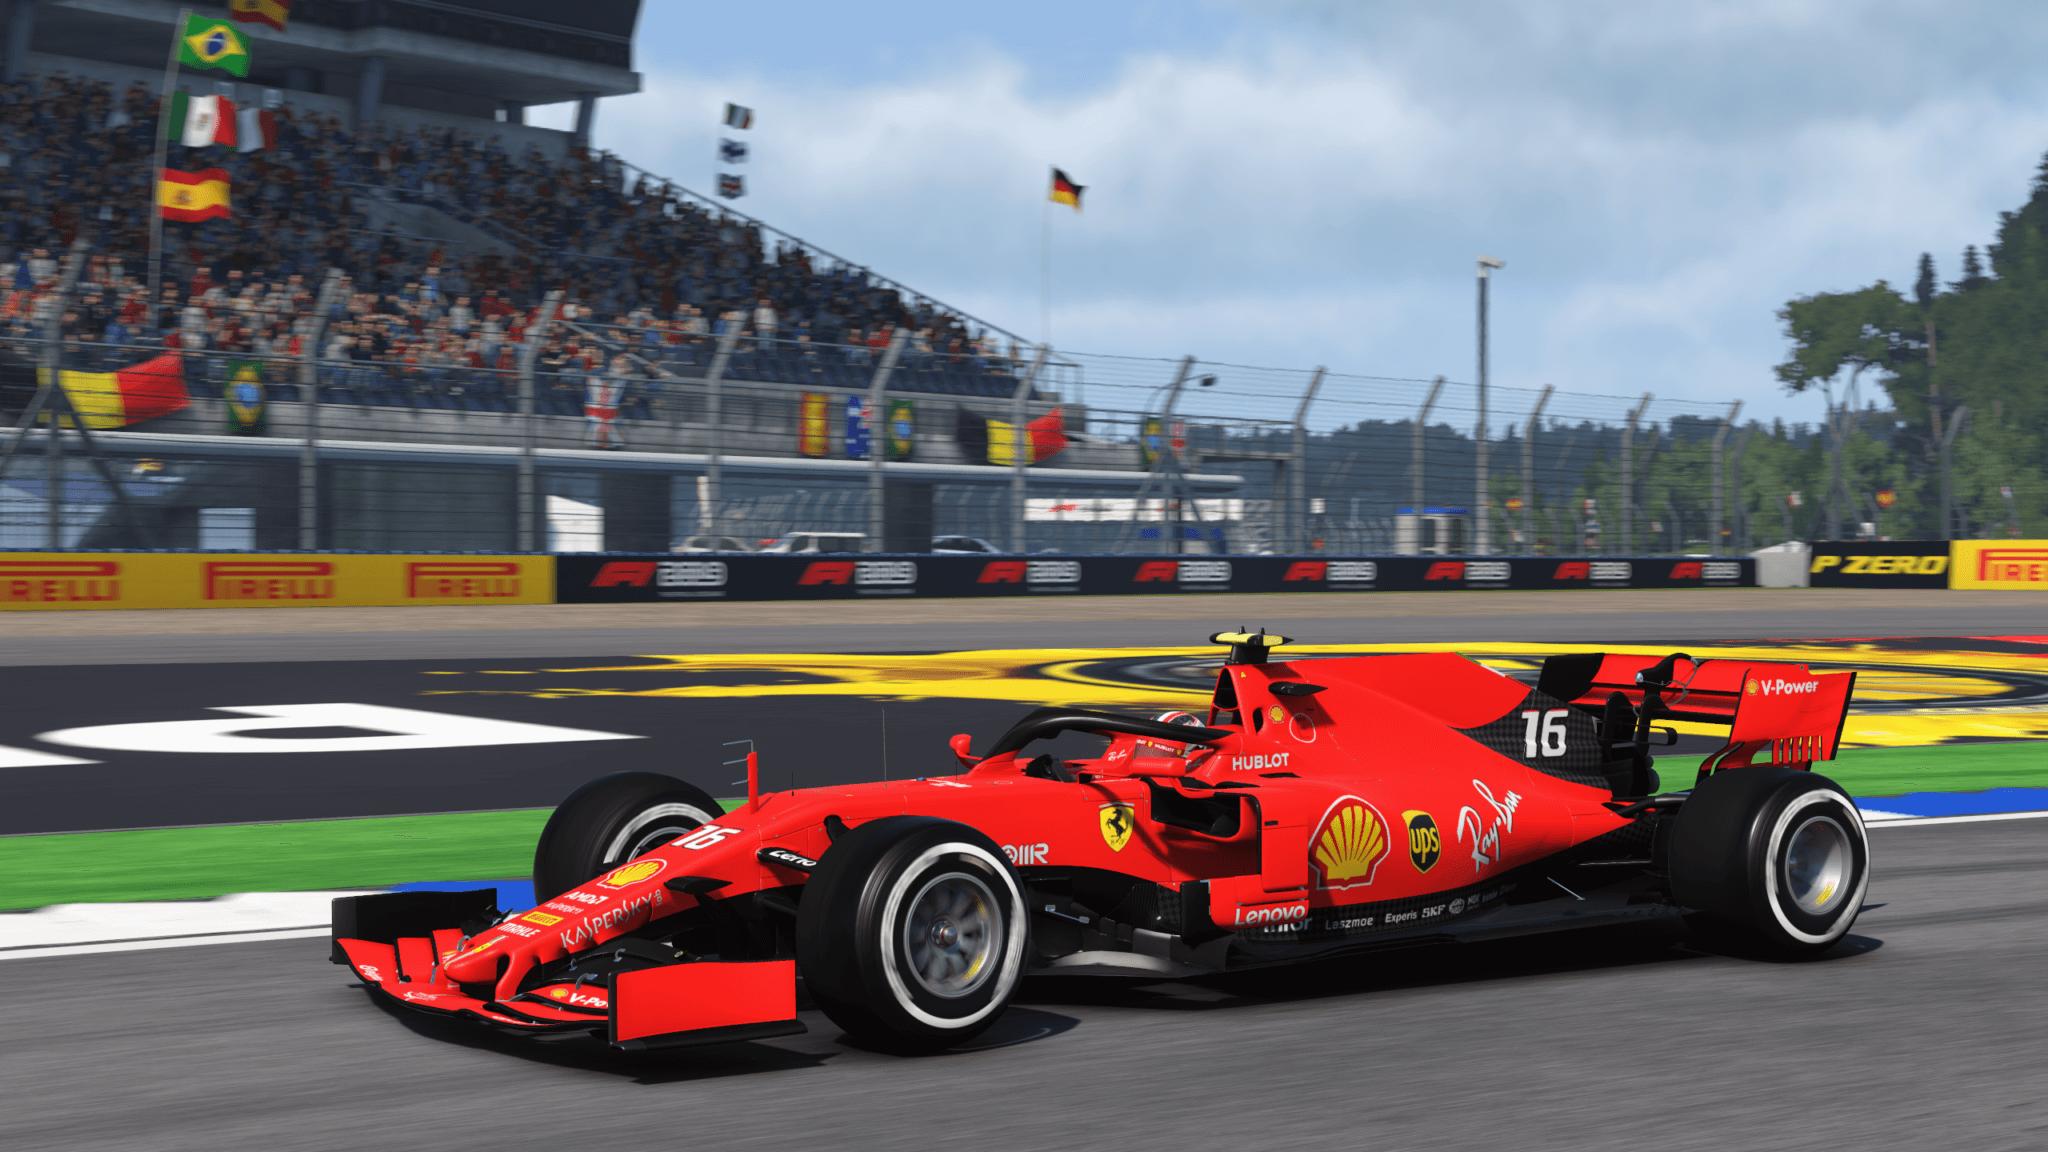 2019 Update Now Available: Tire Wear and Trophy/Achievement GTPlanet